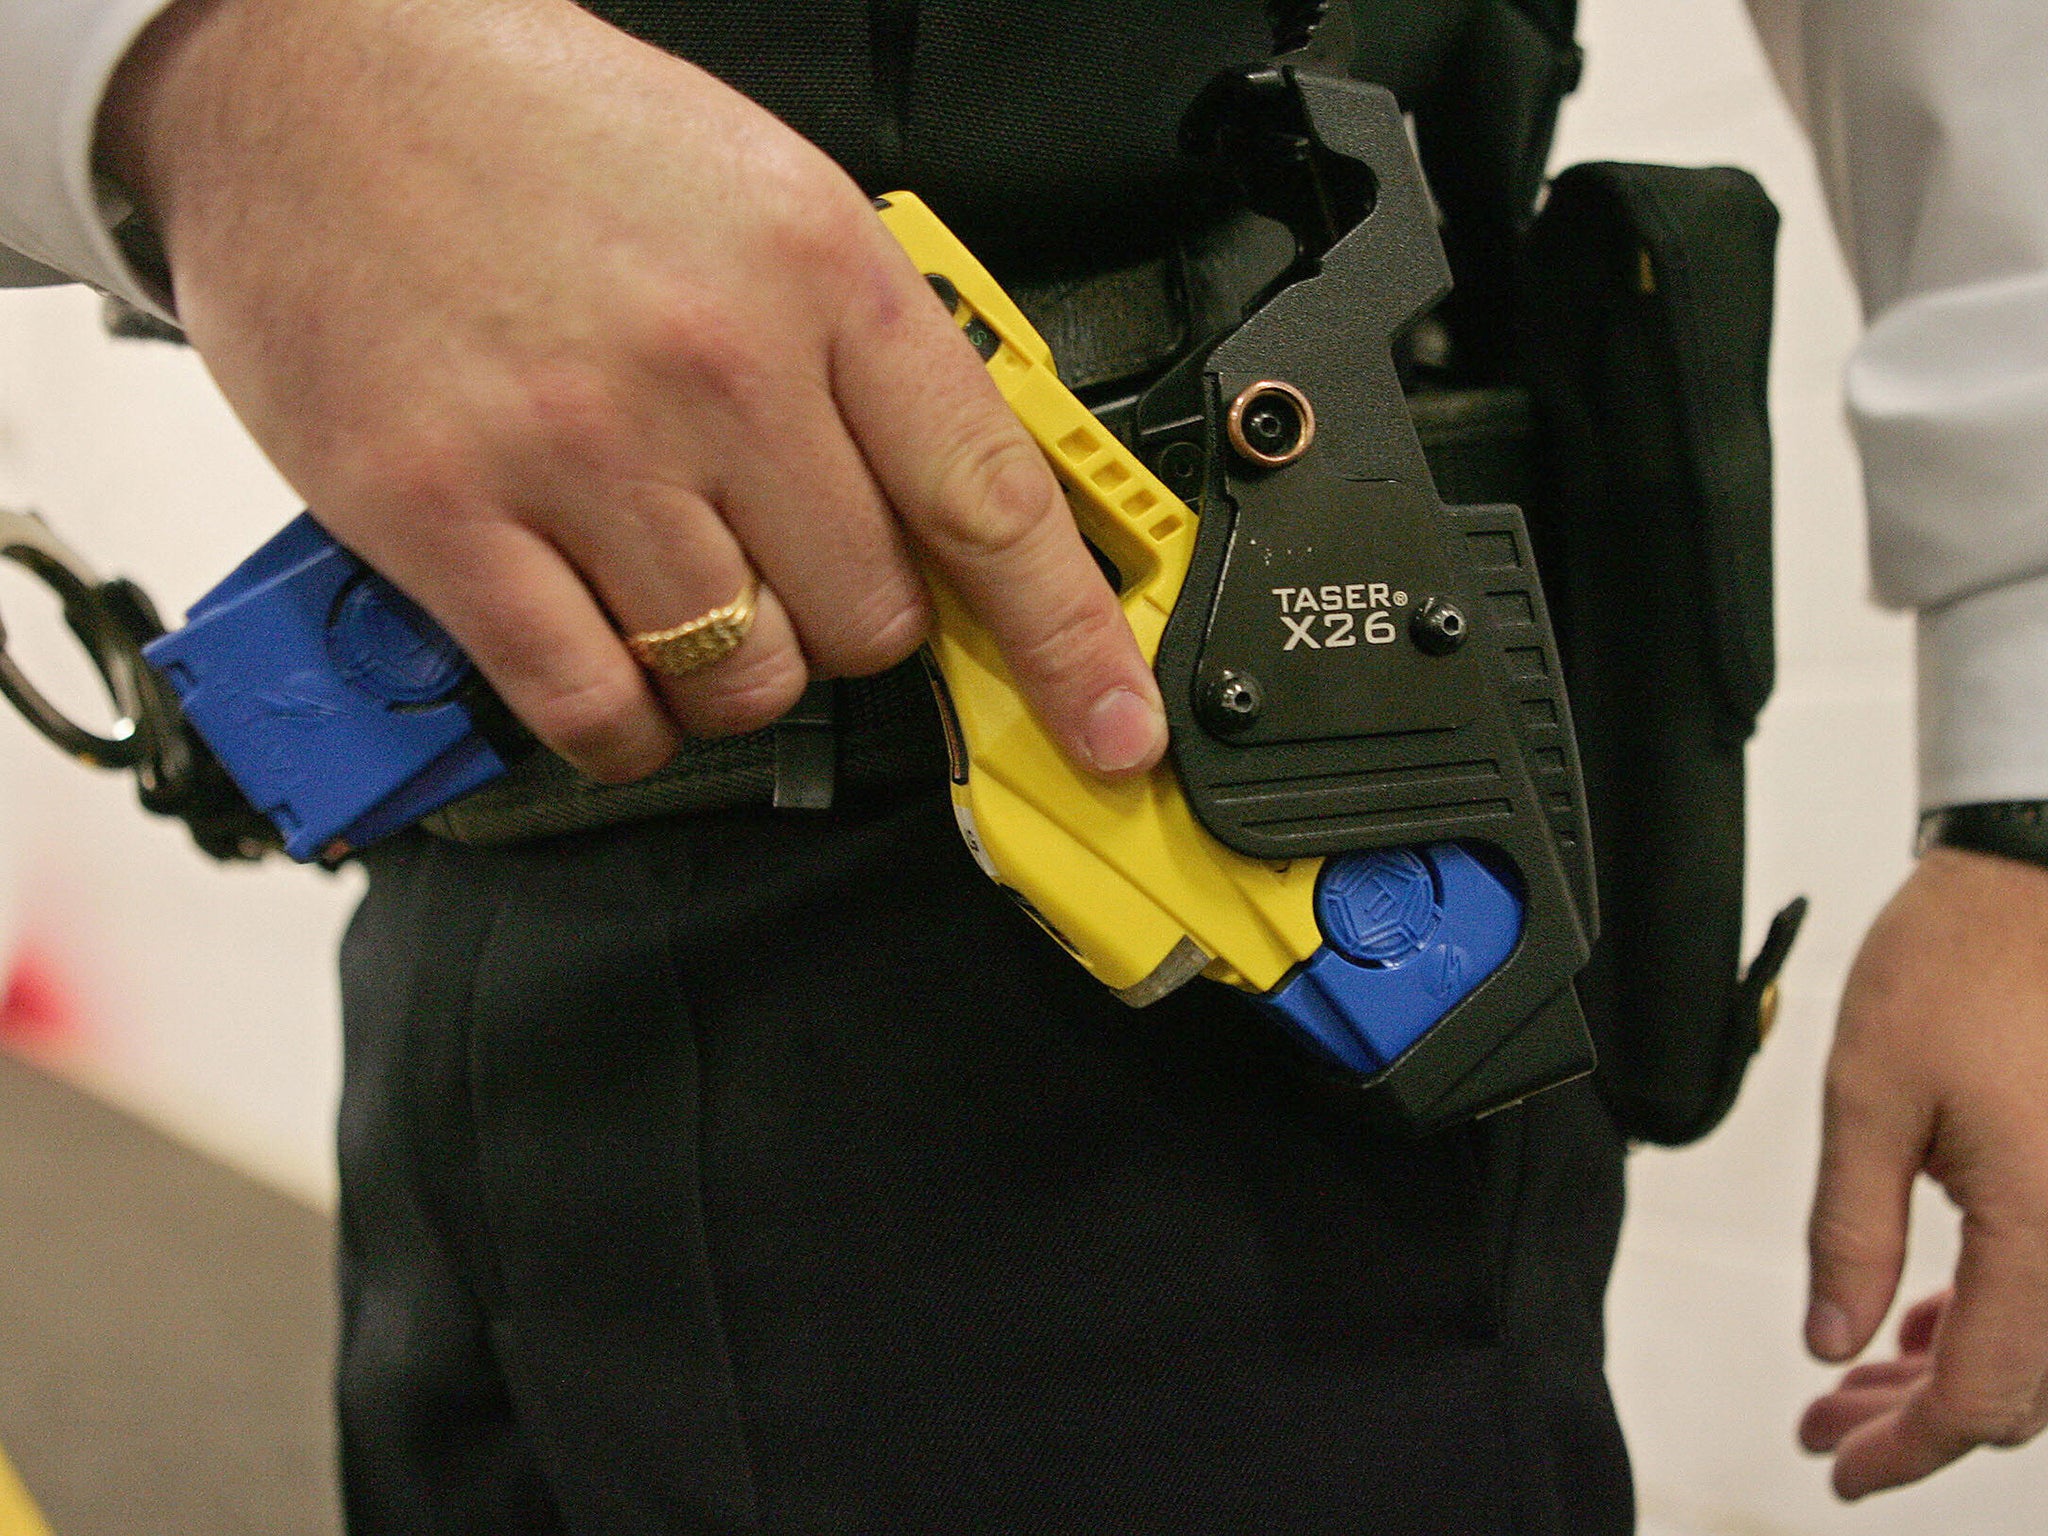 A number of people have died after having a taser used on them, leading critics to warn against use of the weapons